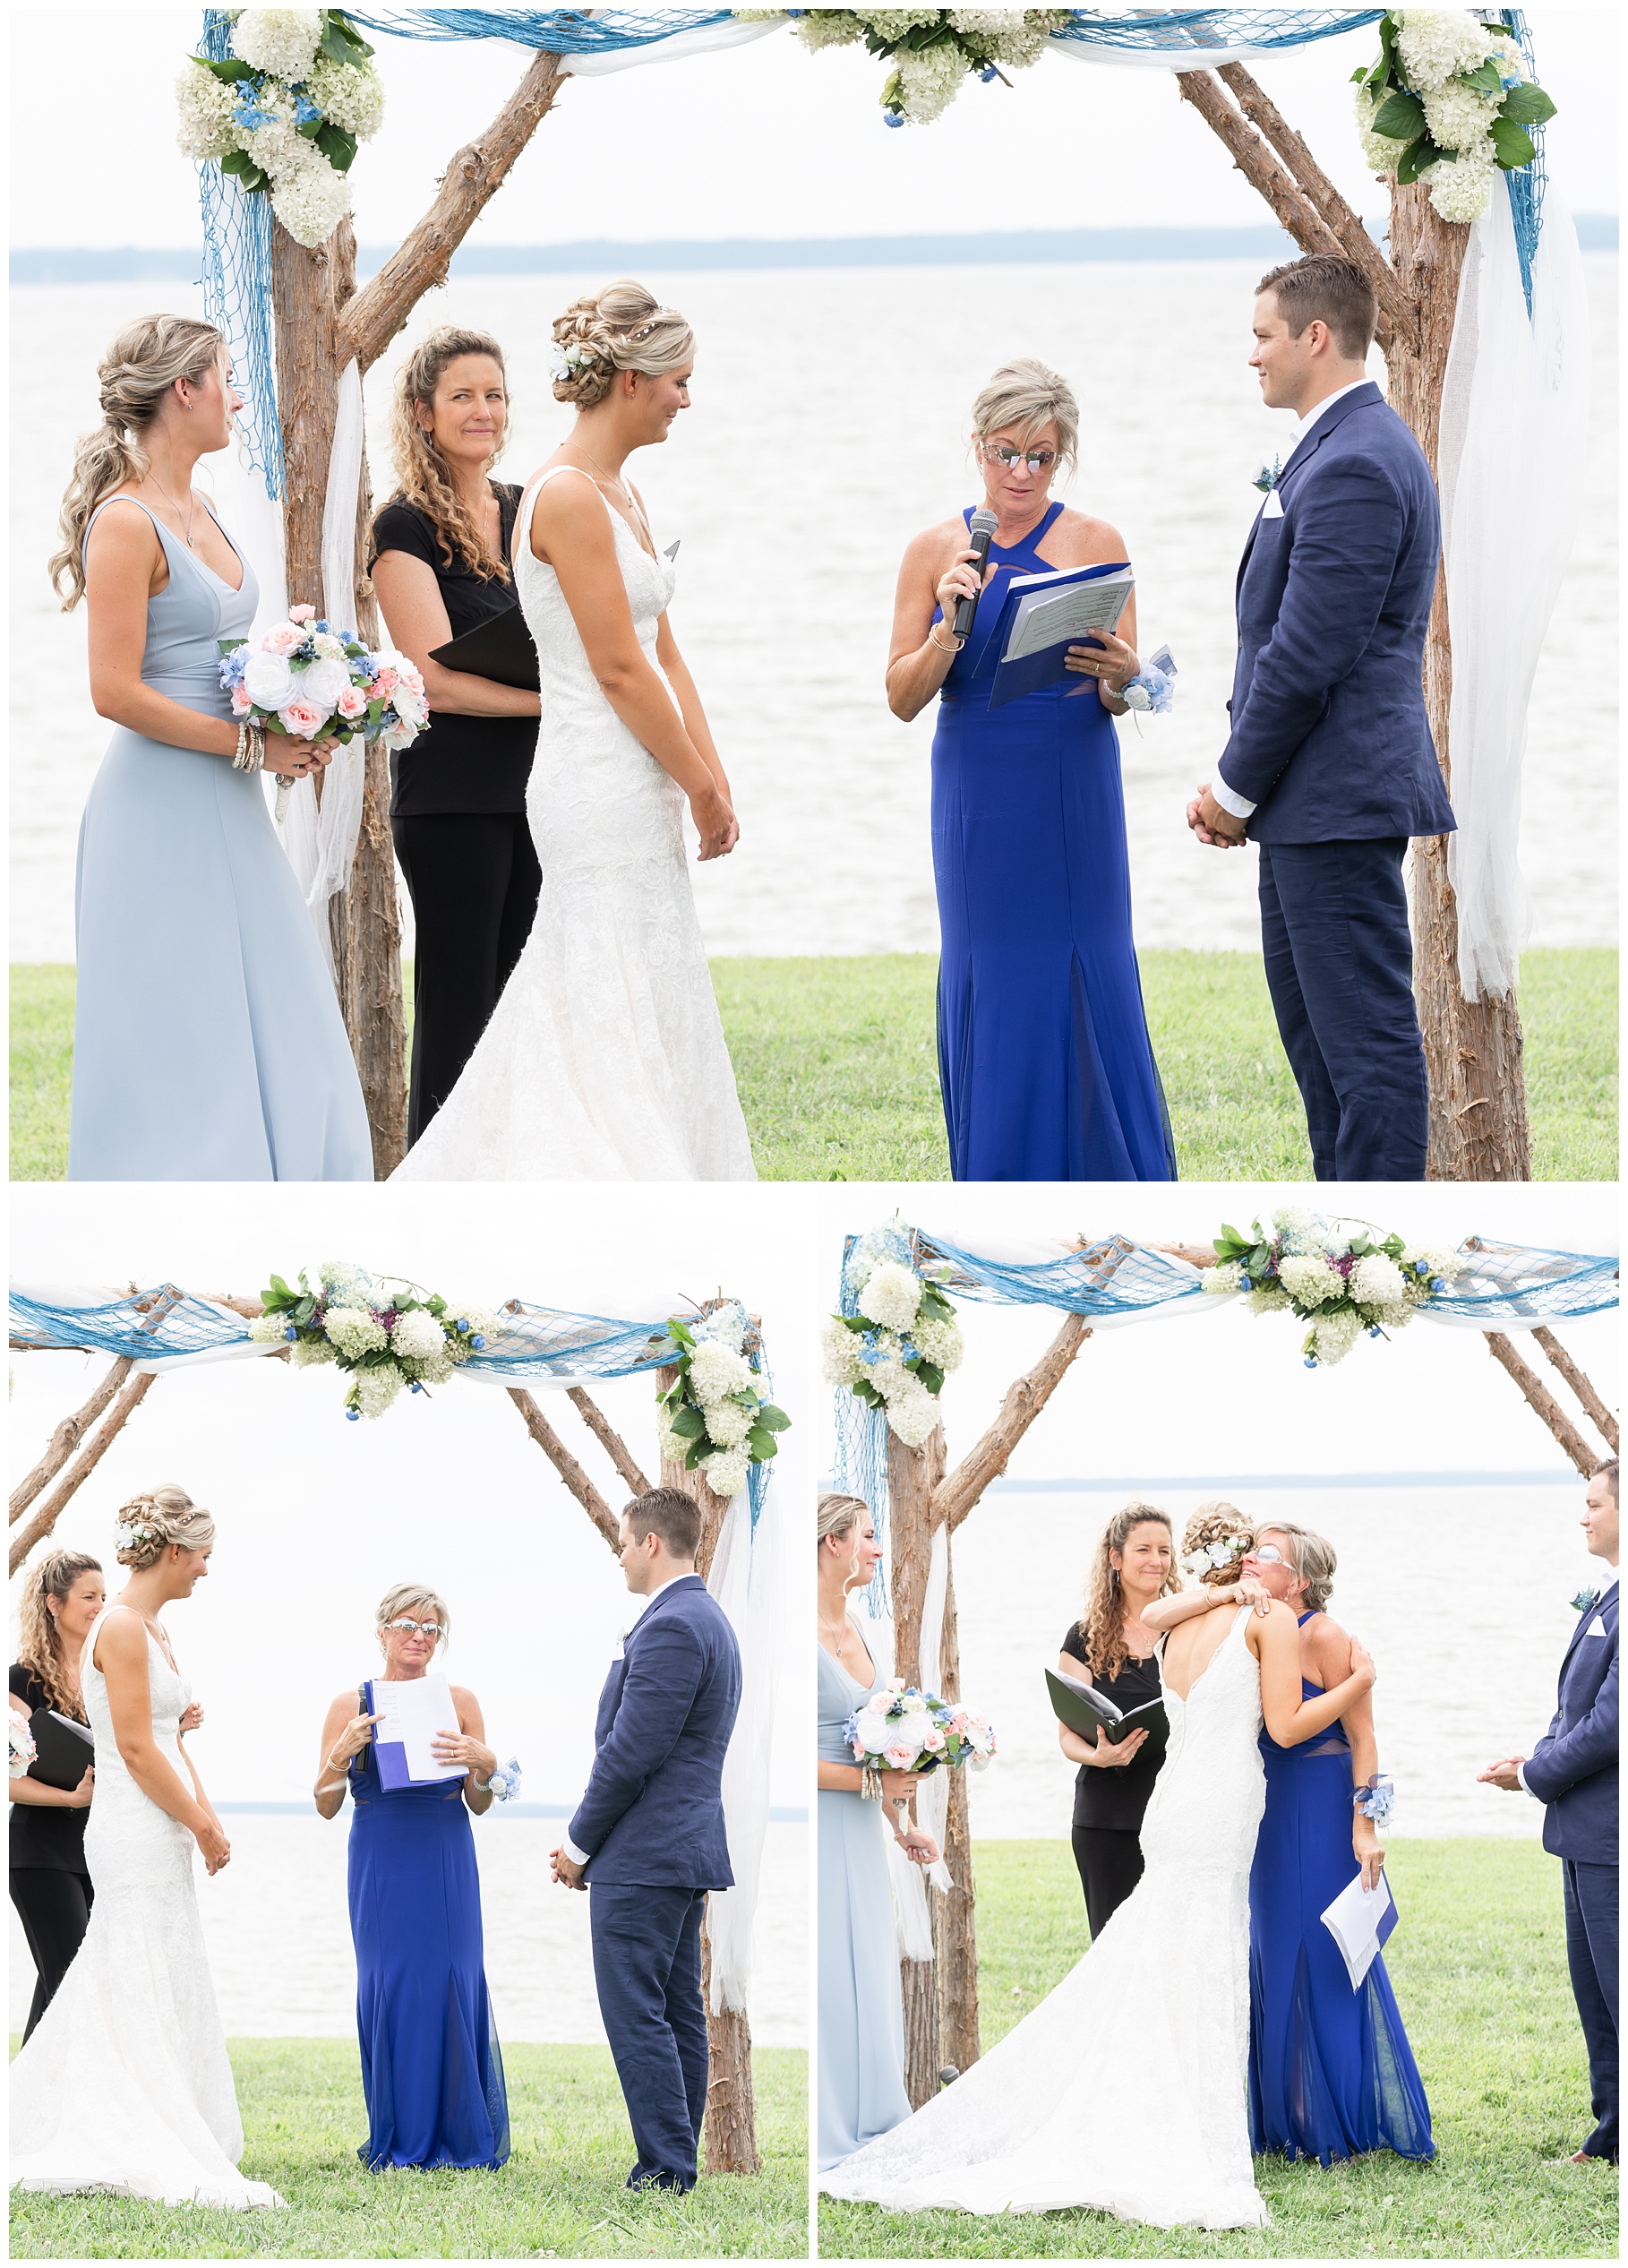 Wedding Collage Reading During Ceremony